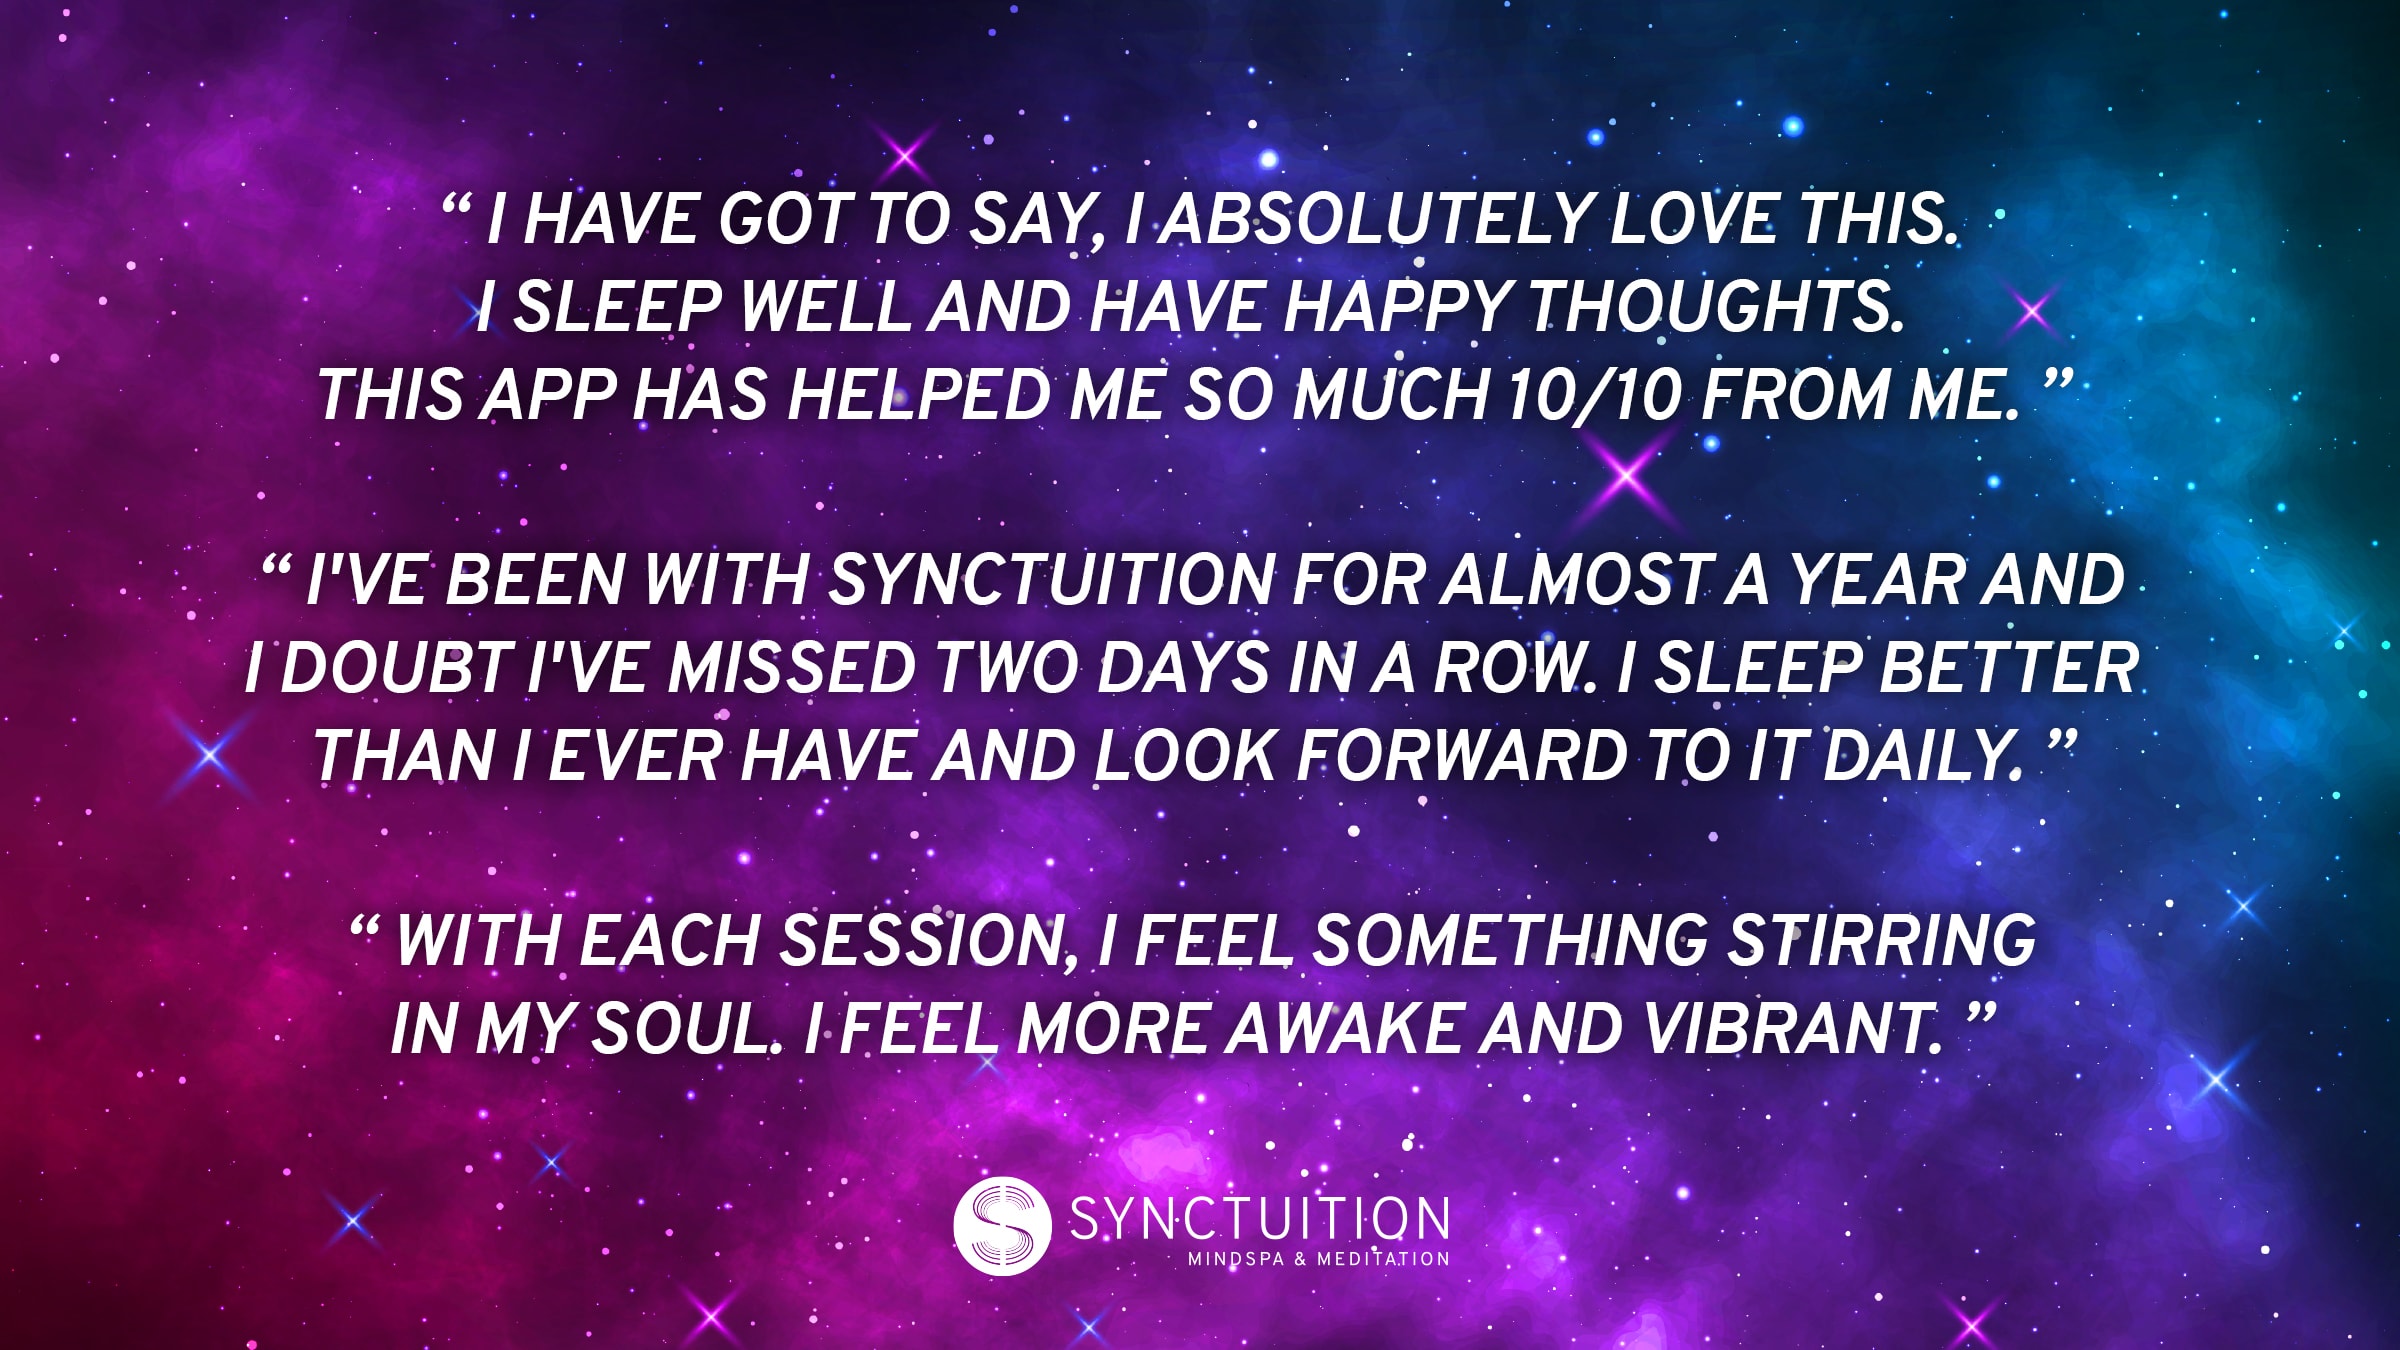 Synctuition is one of best meditation programs out there! The reviews say it all.